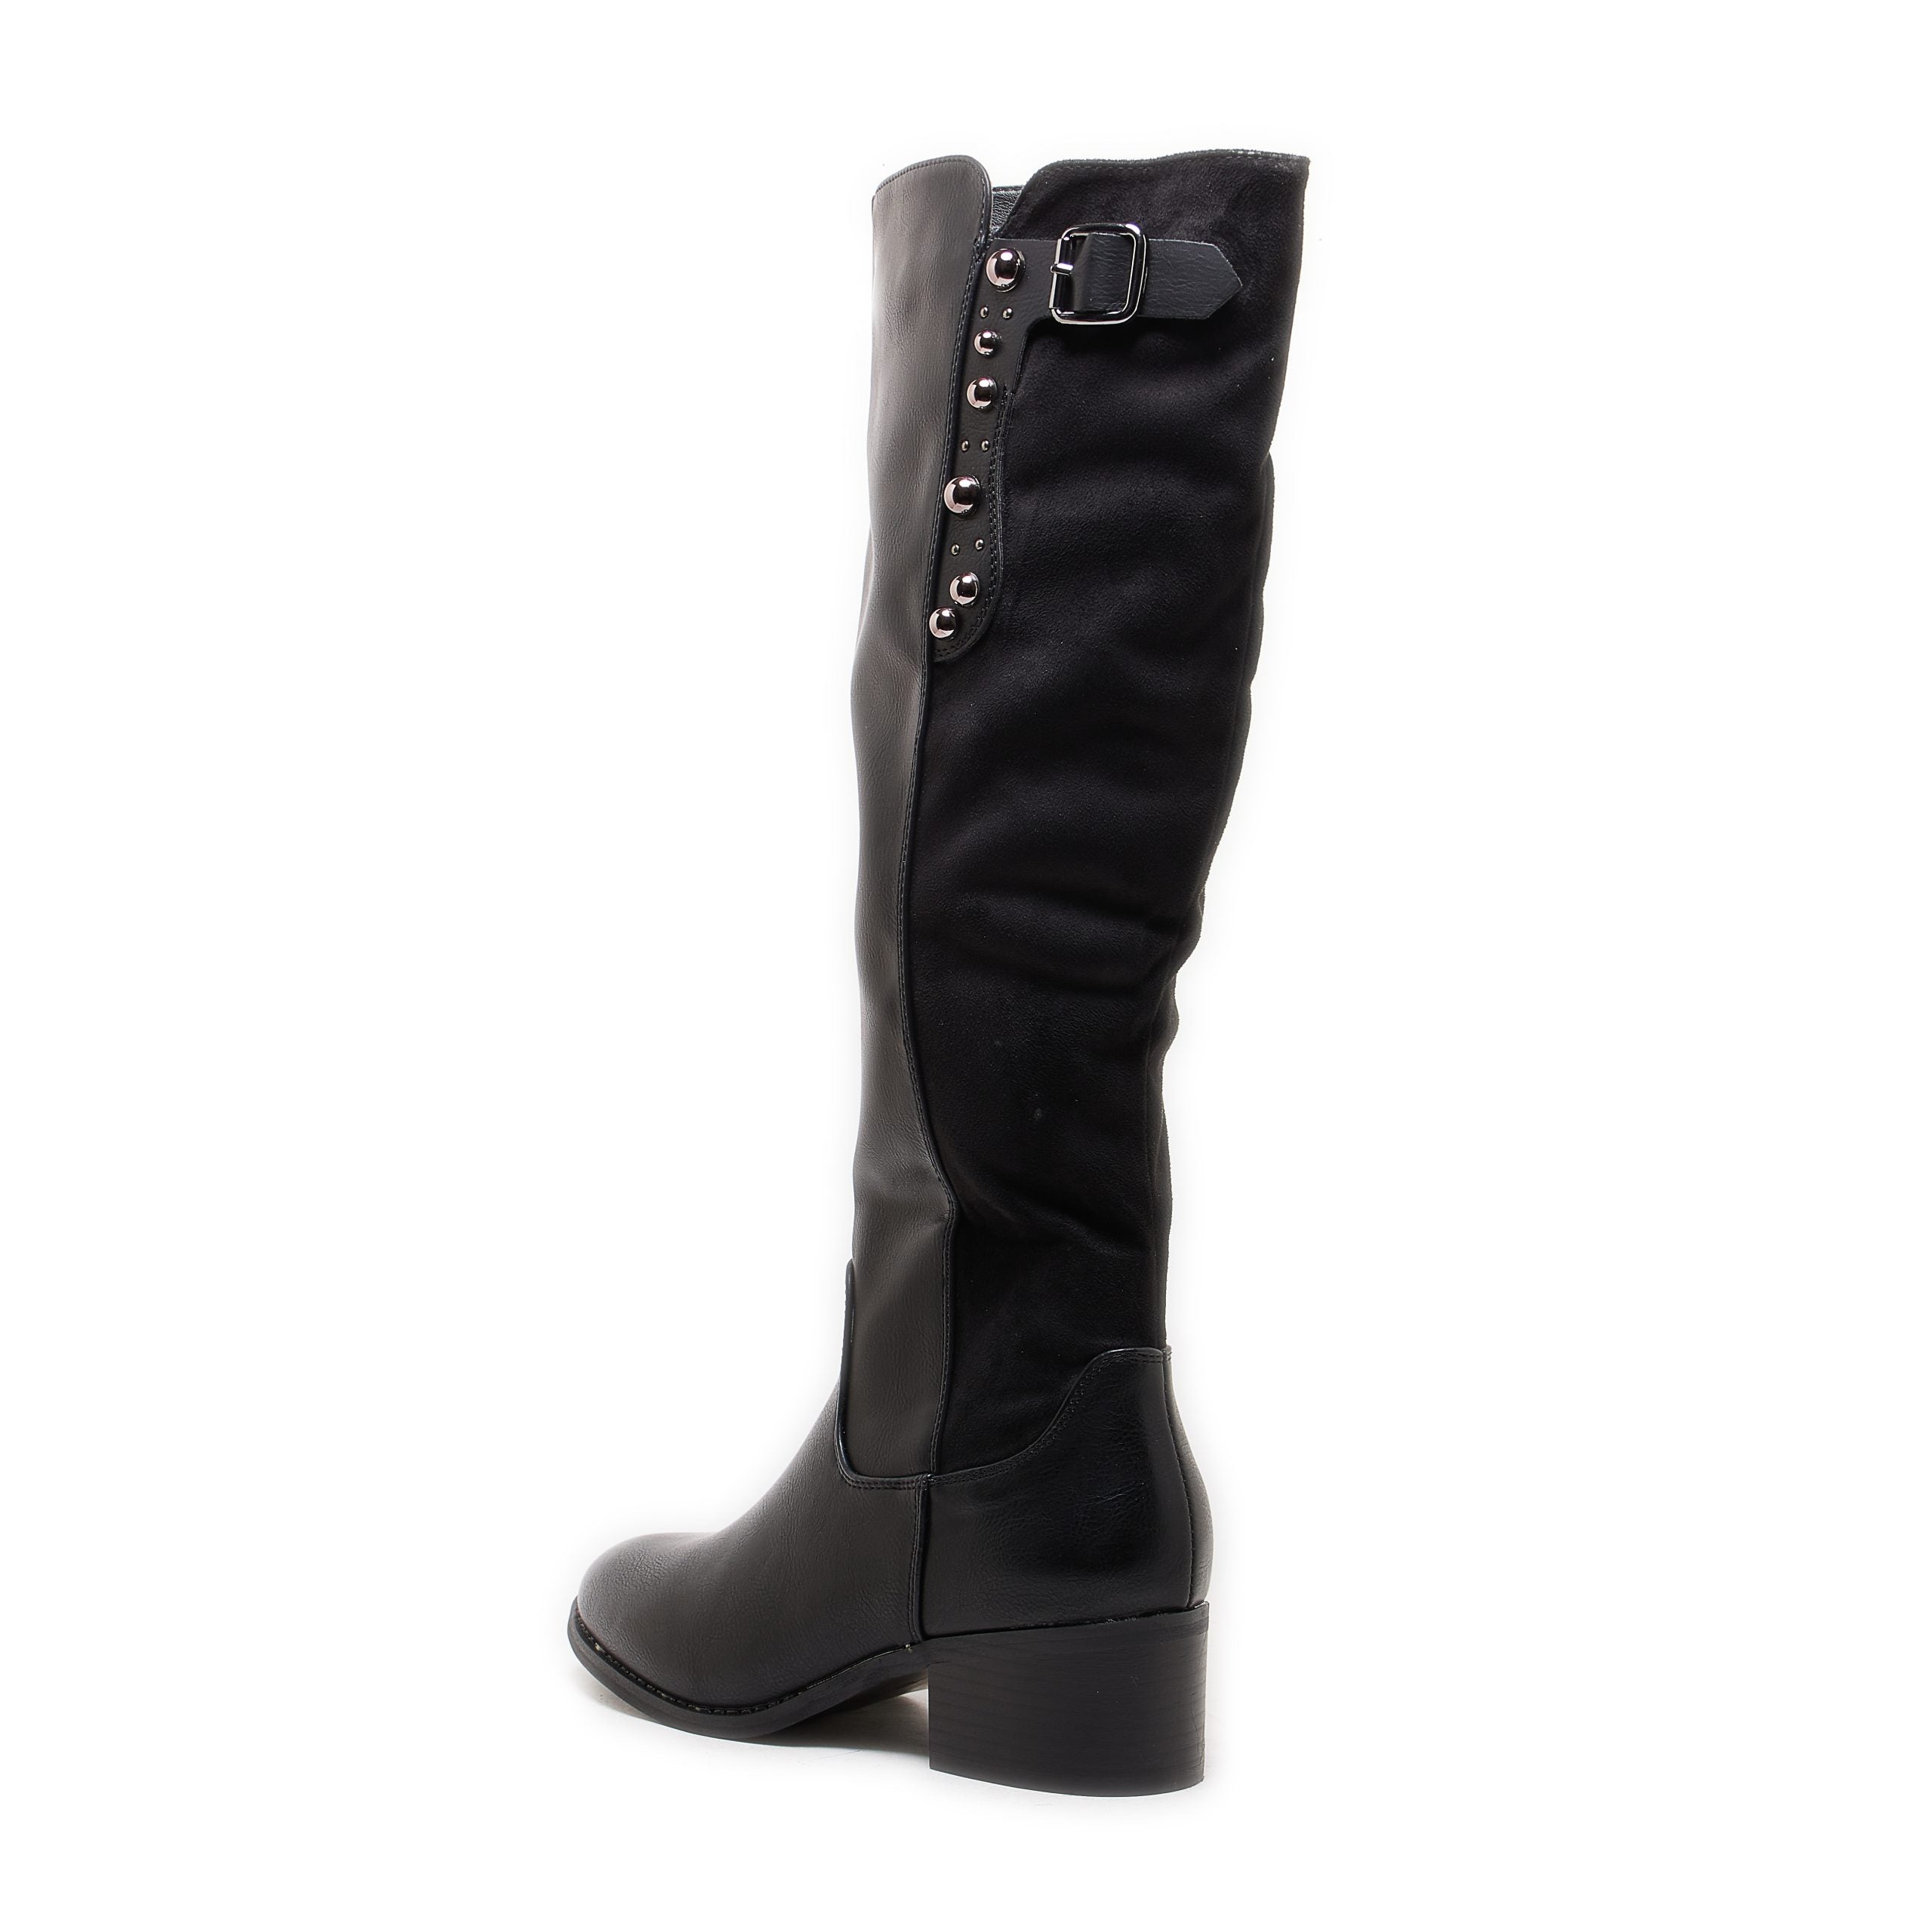 Shoeroom Leather High Boot With Zipper 2412